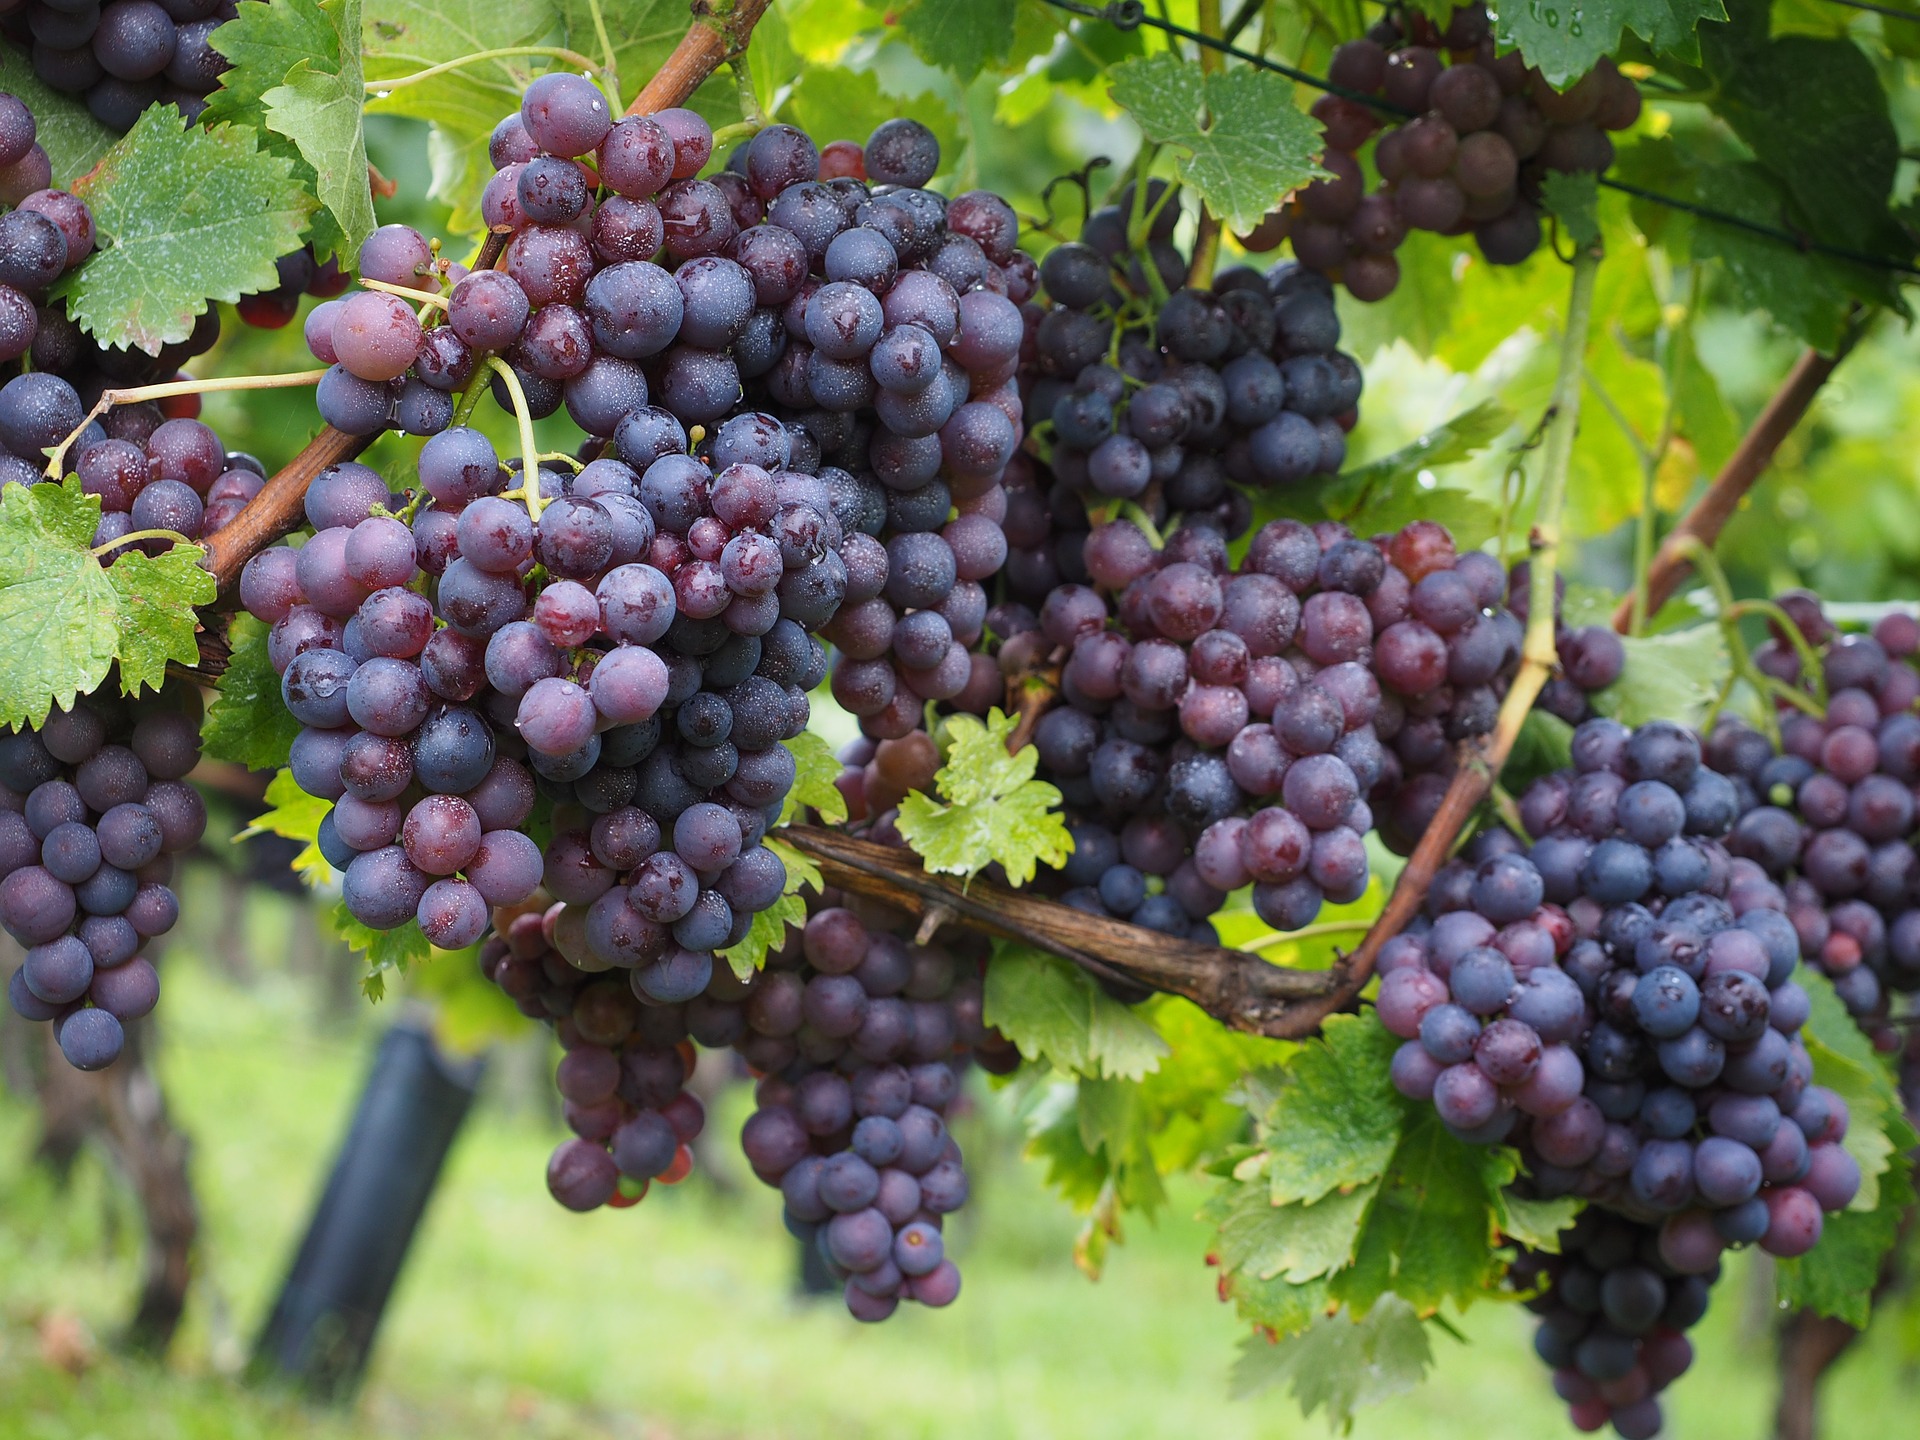 Grapes, the fruit of the vine. Credit image: pixabay.com. No attribution required.